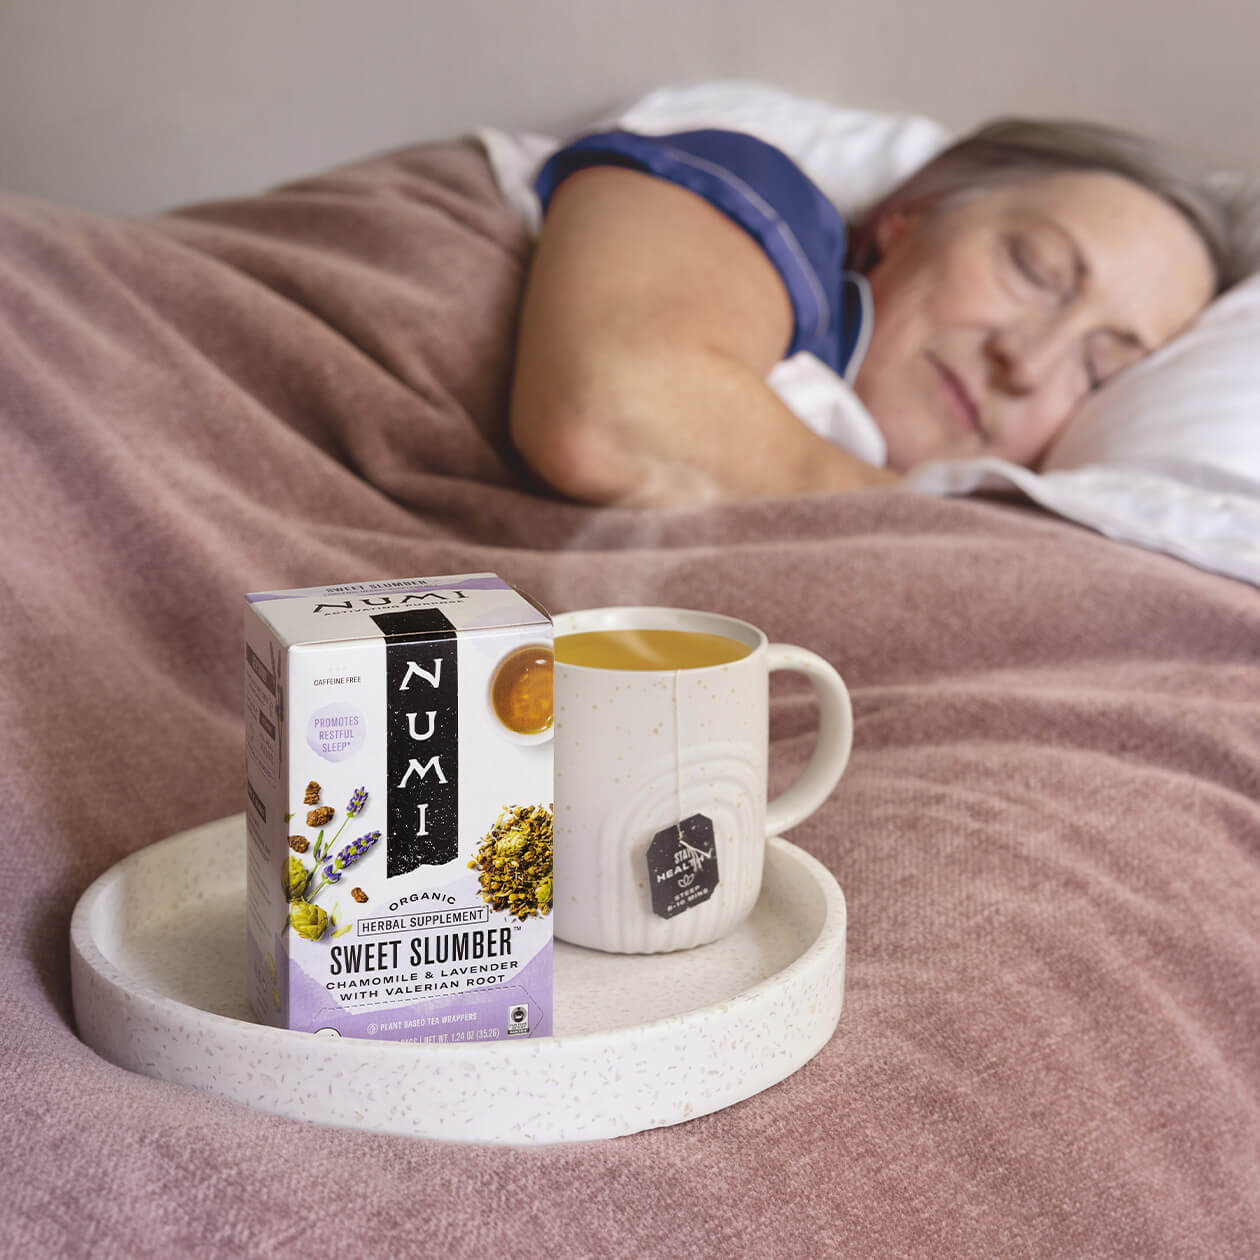 A woman sleeping in her bed next to a cup of Sweet Slumber tea